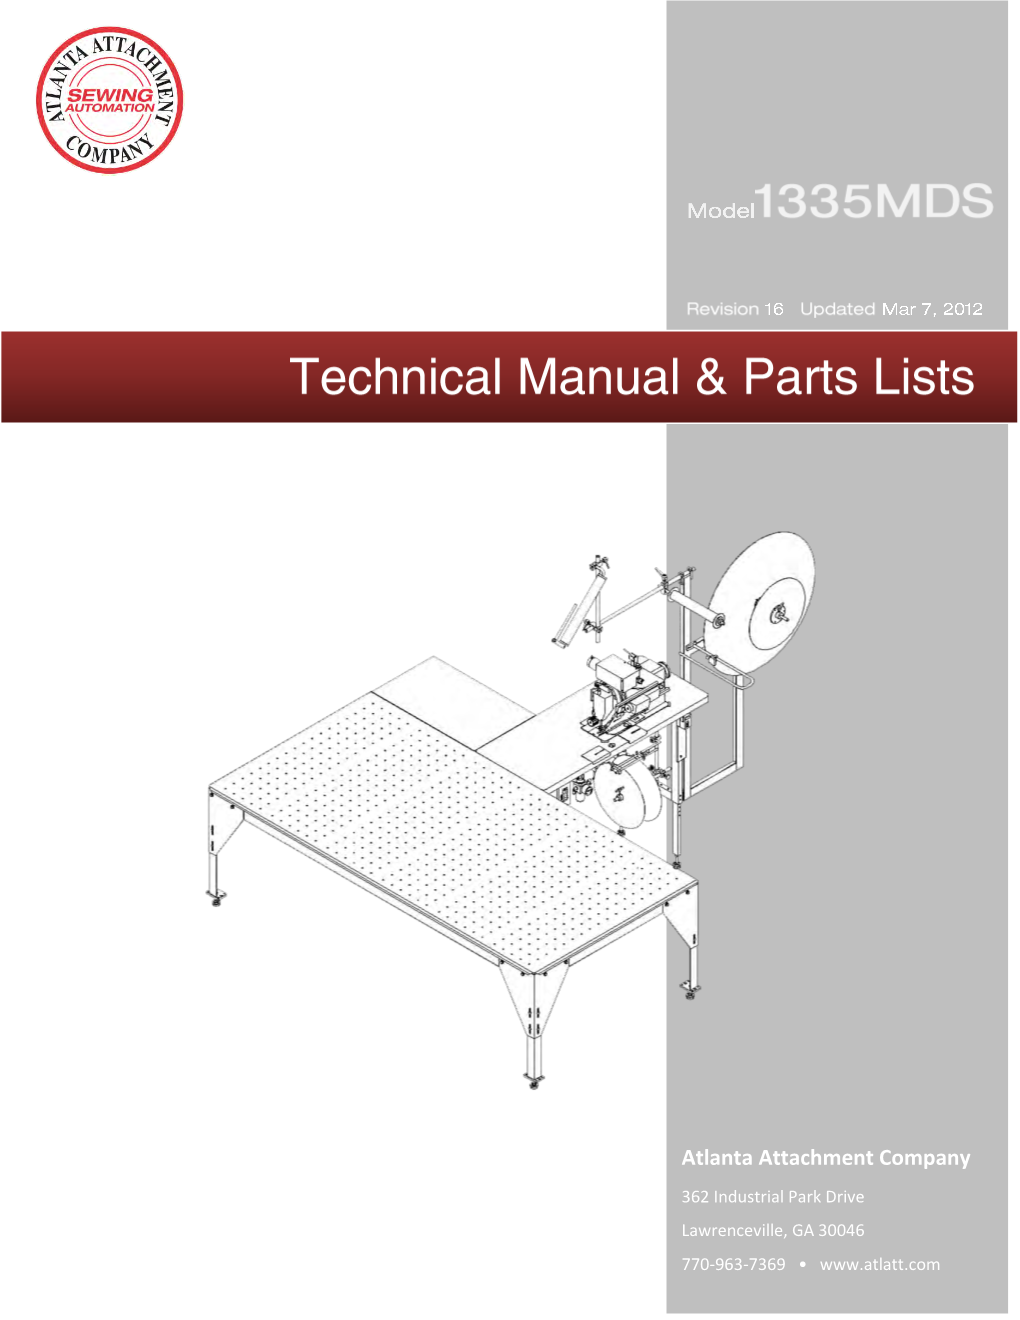 Technical Manual & Parts Lists